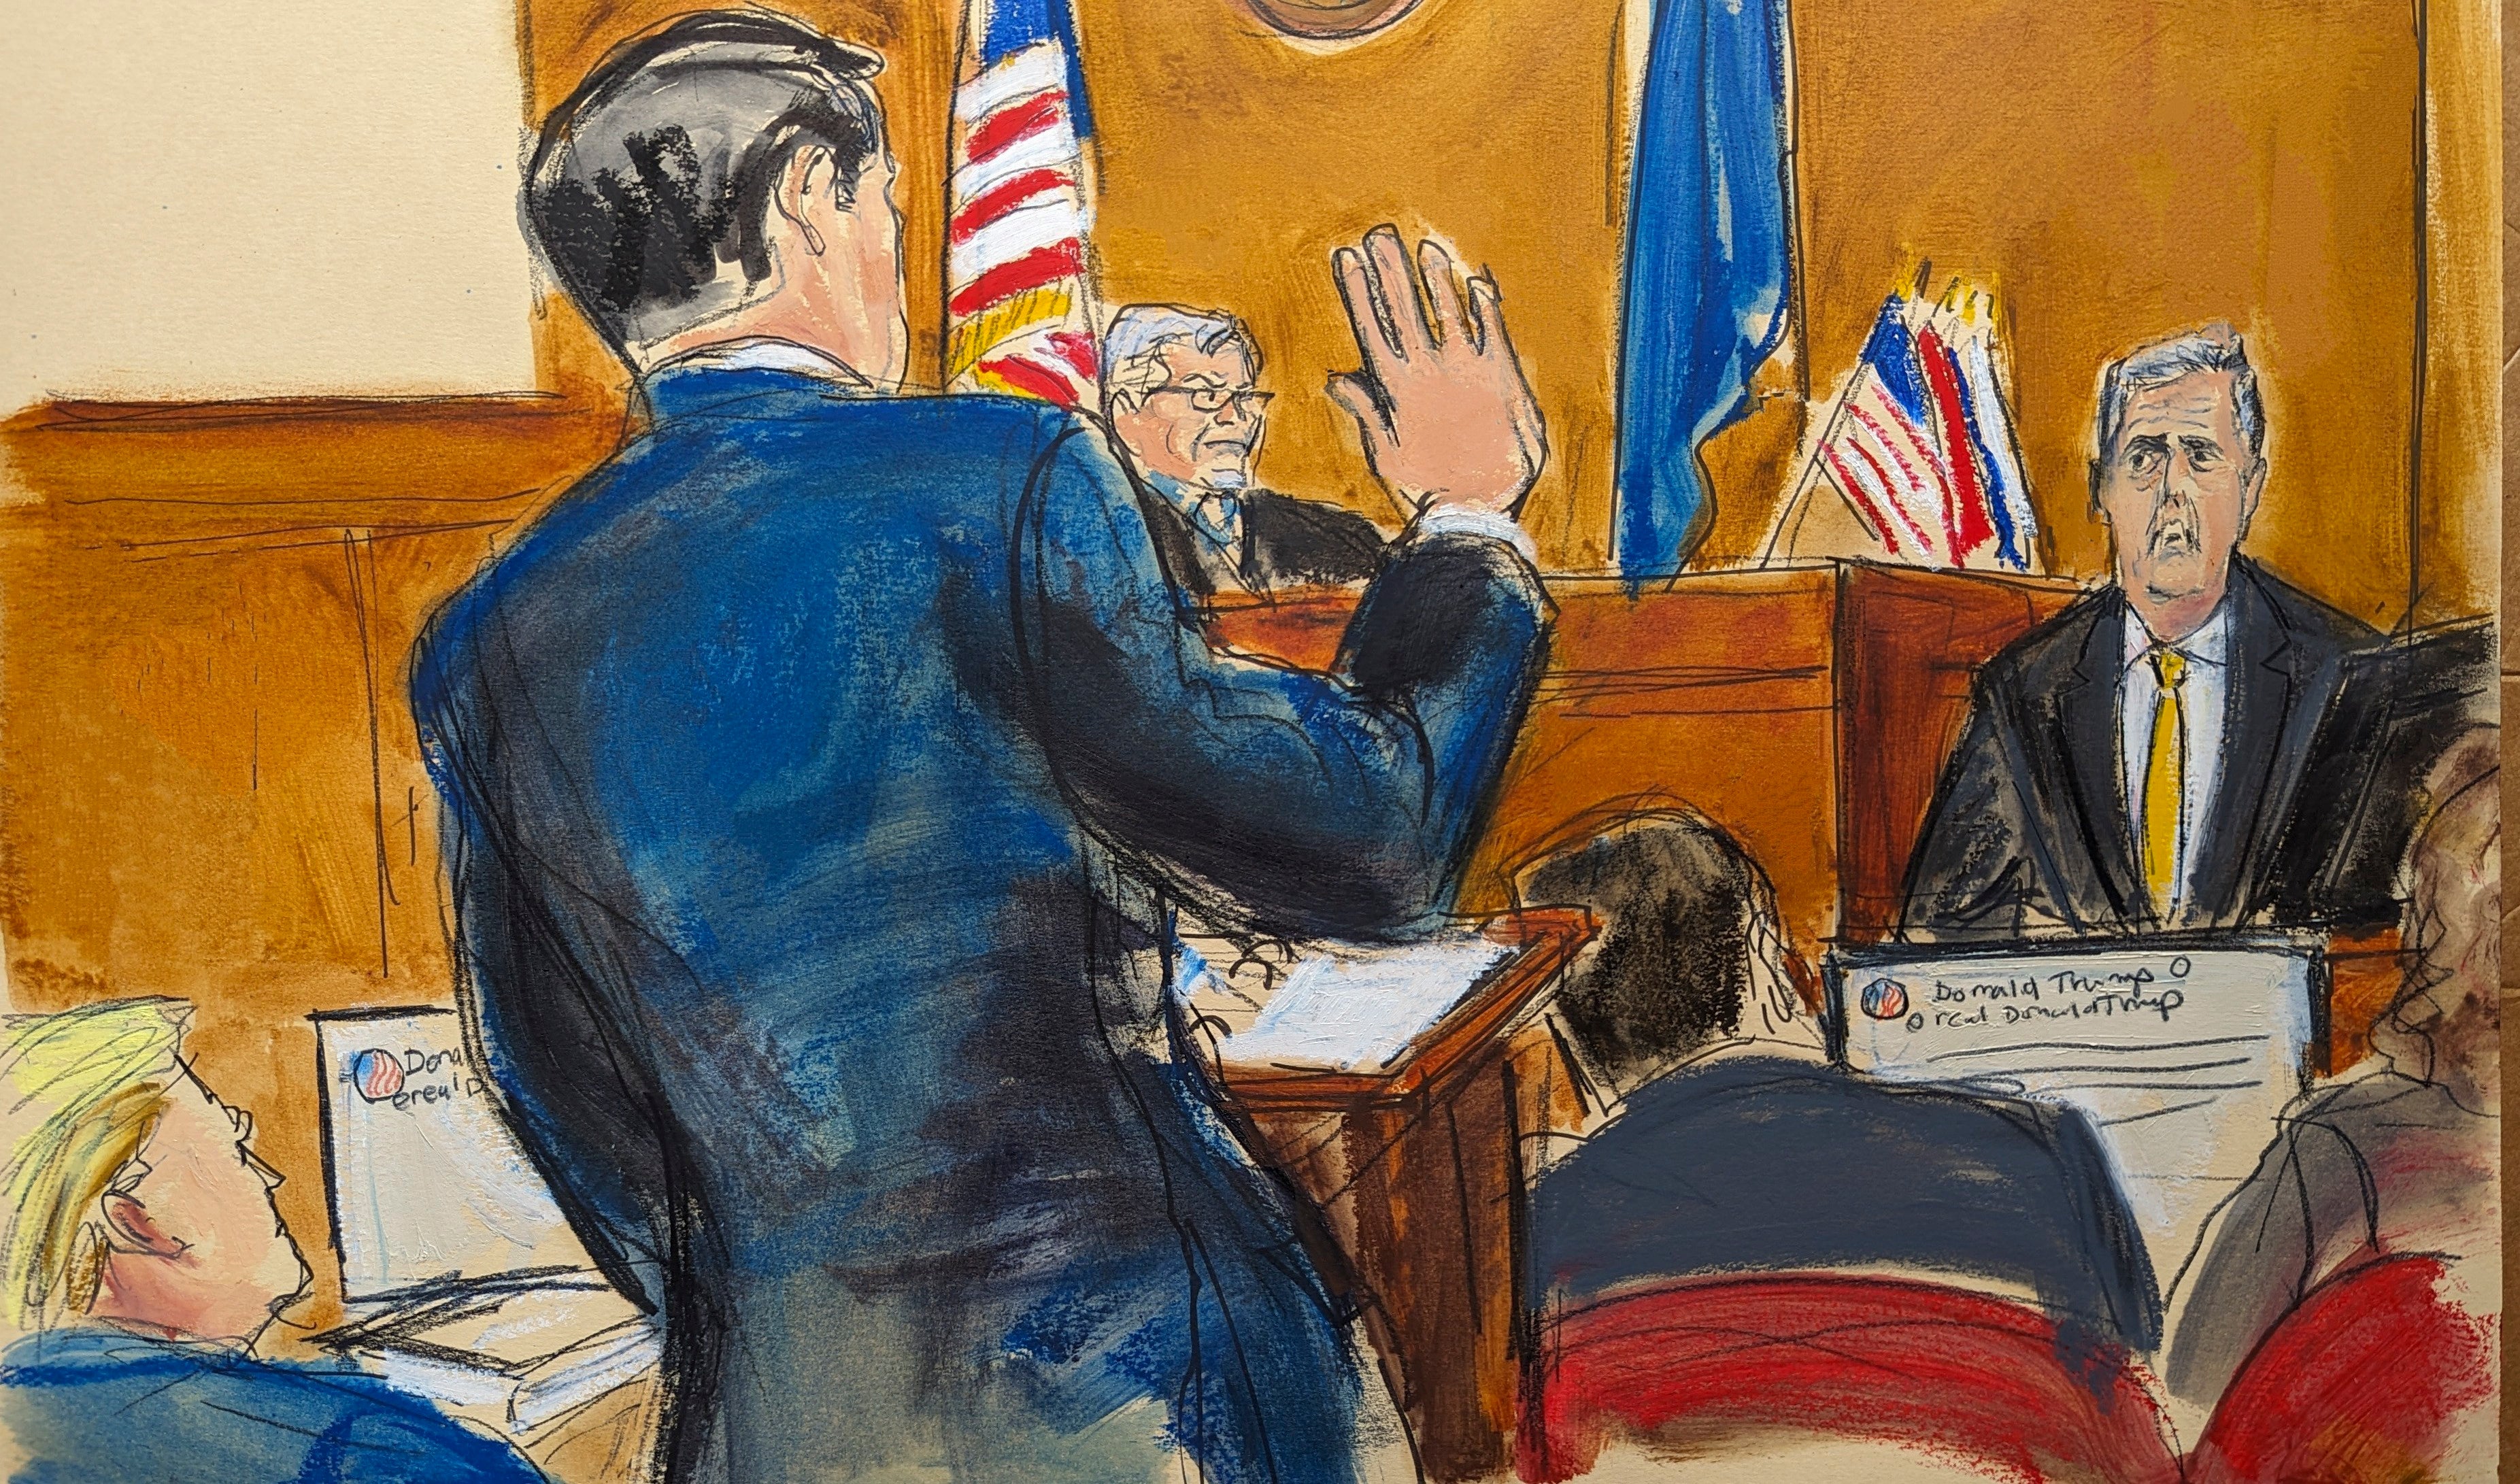 A courtroom sketch depicts Donald Trump’s defense attorney Todd Blanche questioning Michael Cohen on the witness stand in the former president’s hush money trial on 16 May.